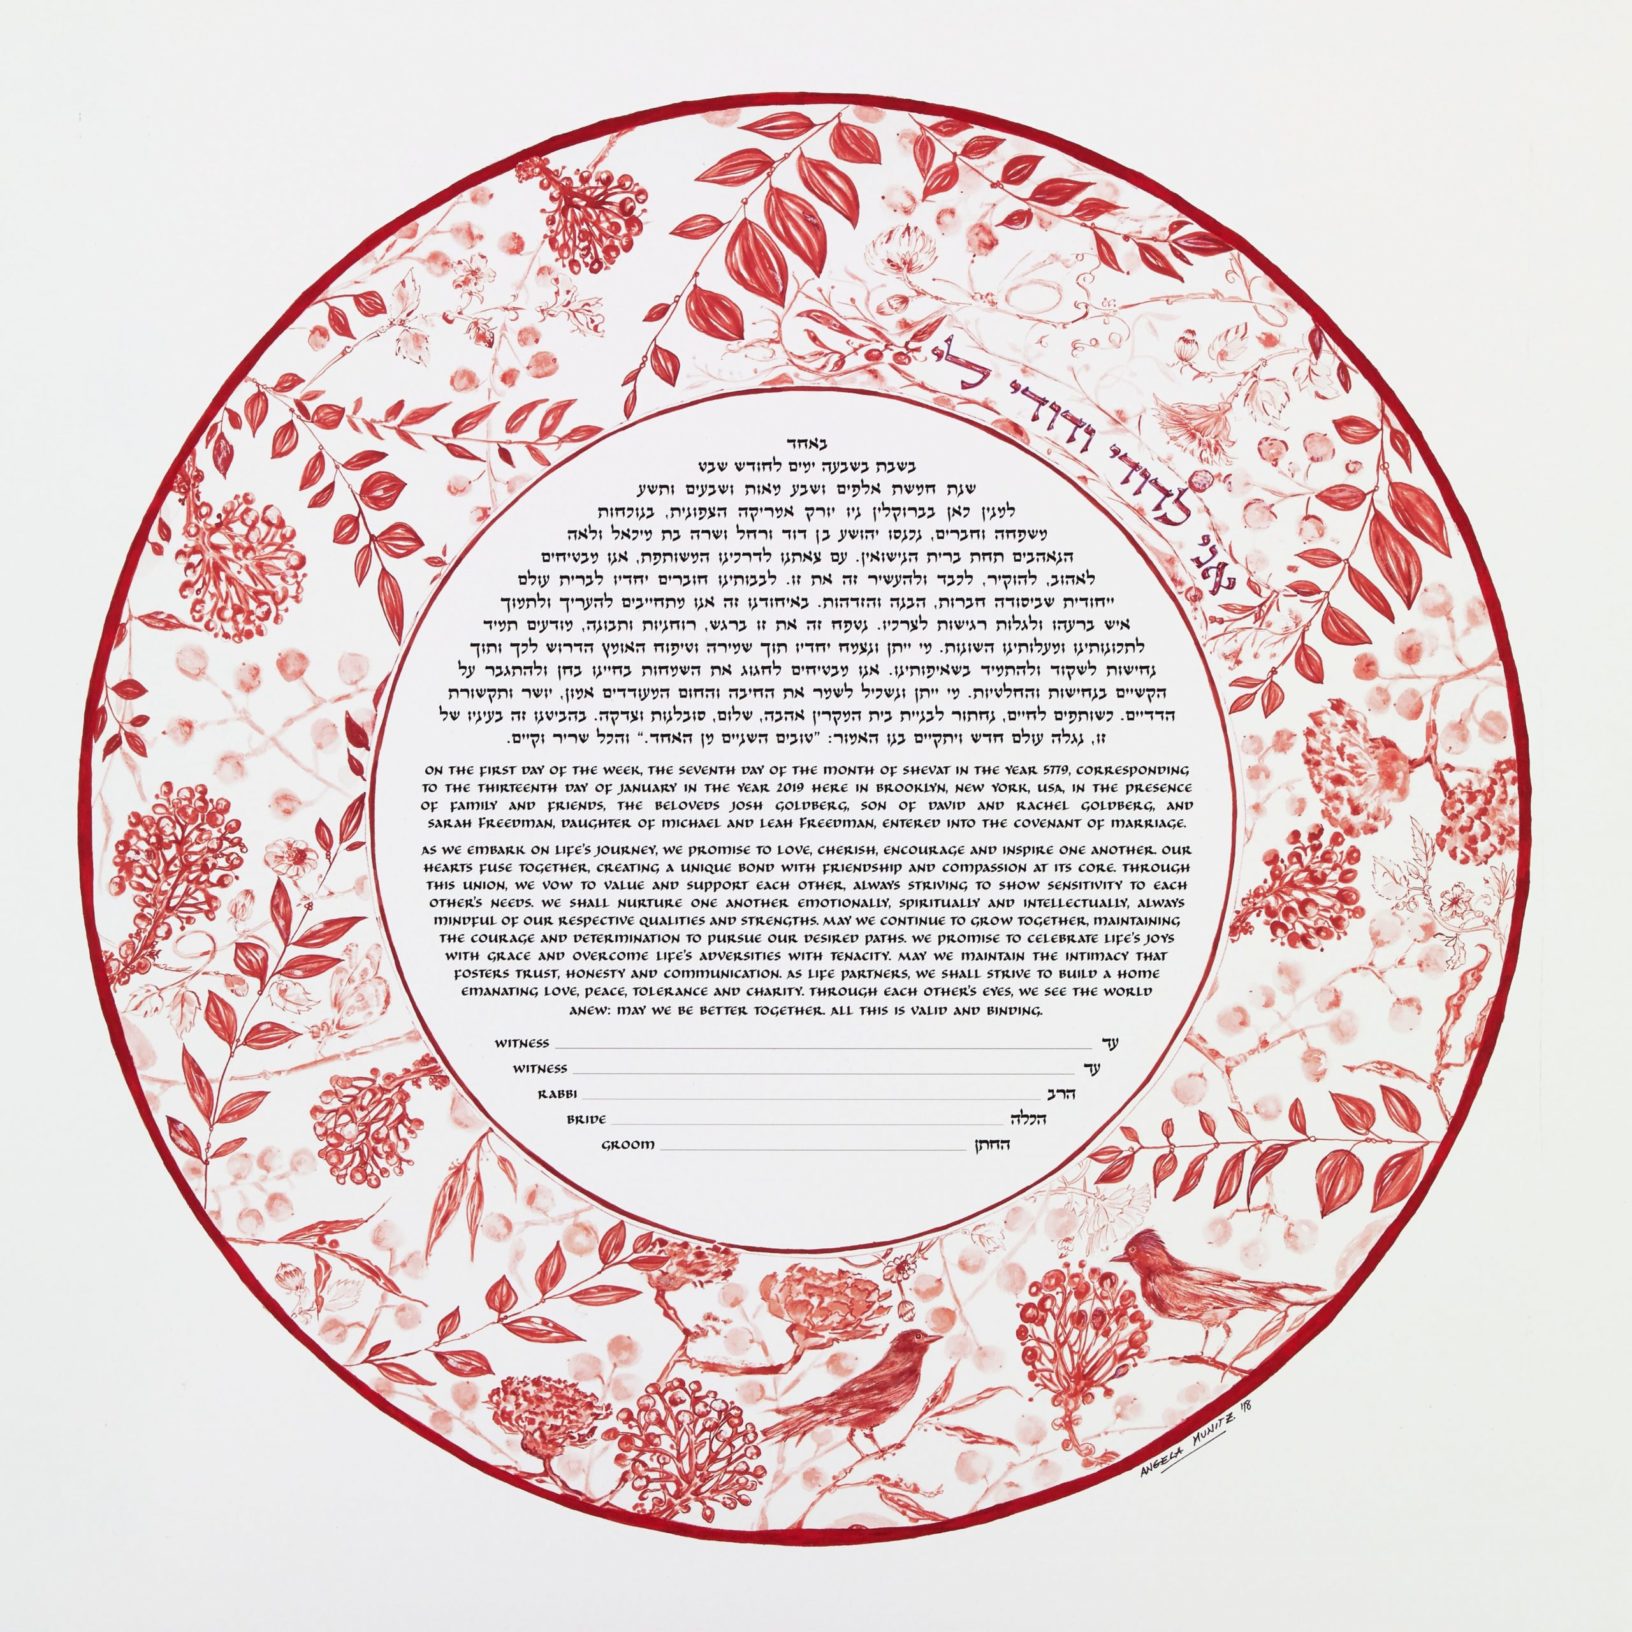 Never Ending Circle Of Love Ketubah Marriage Contracts by Angela Munitz